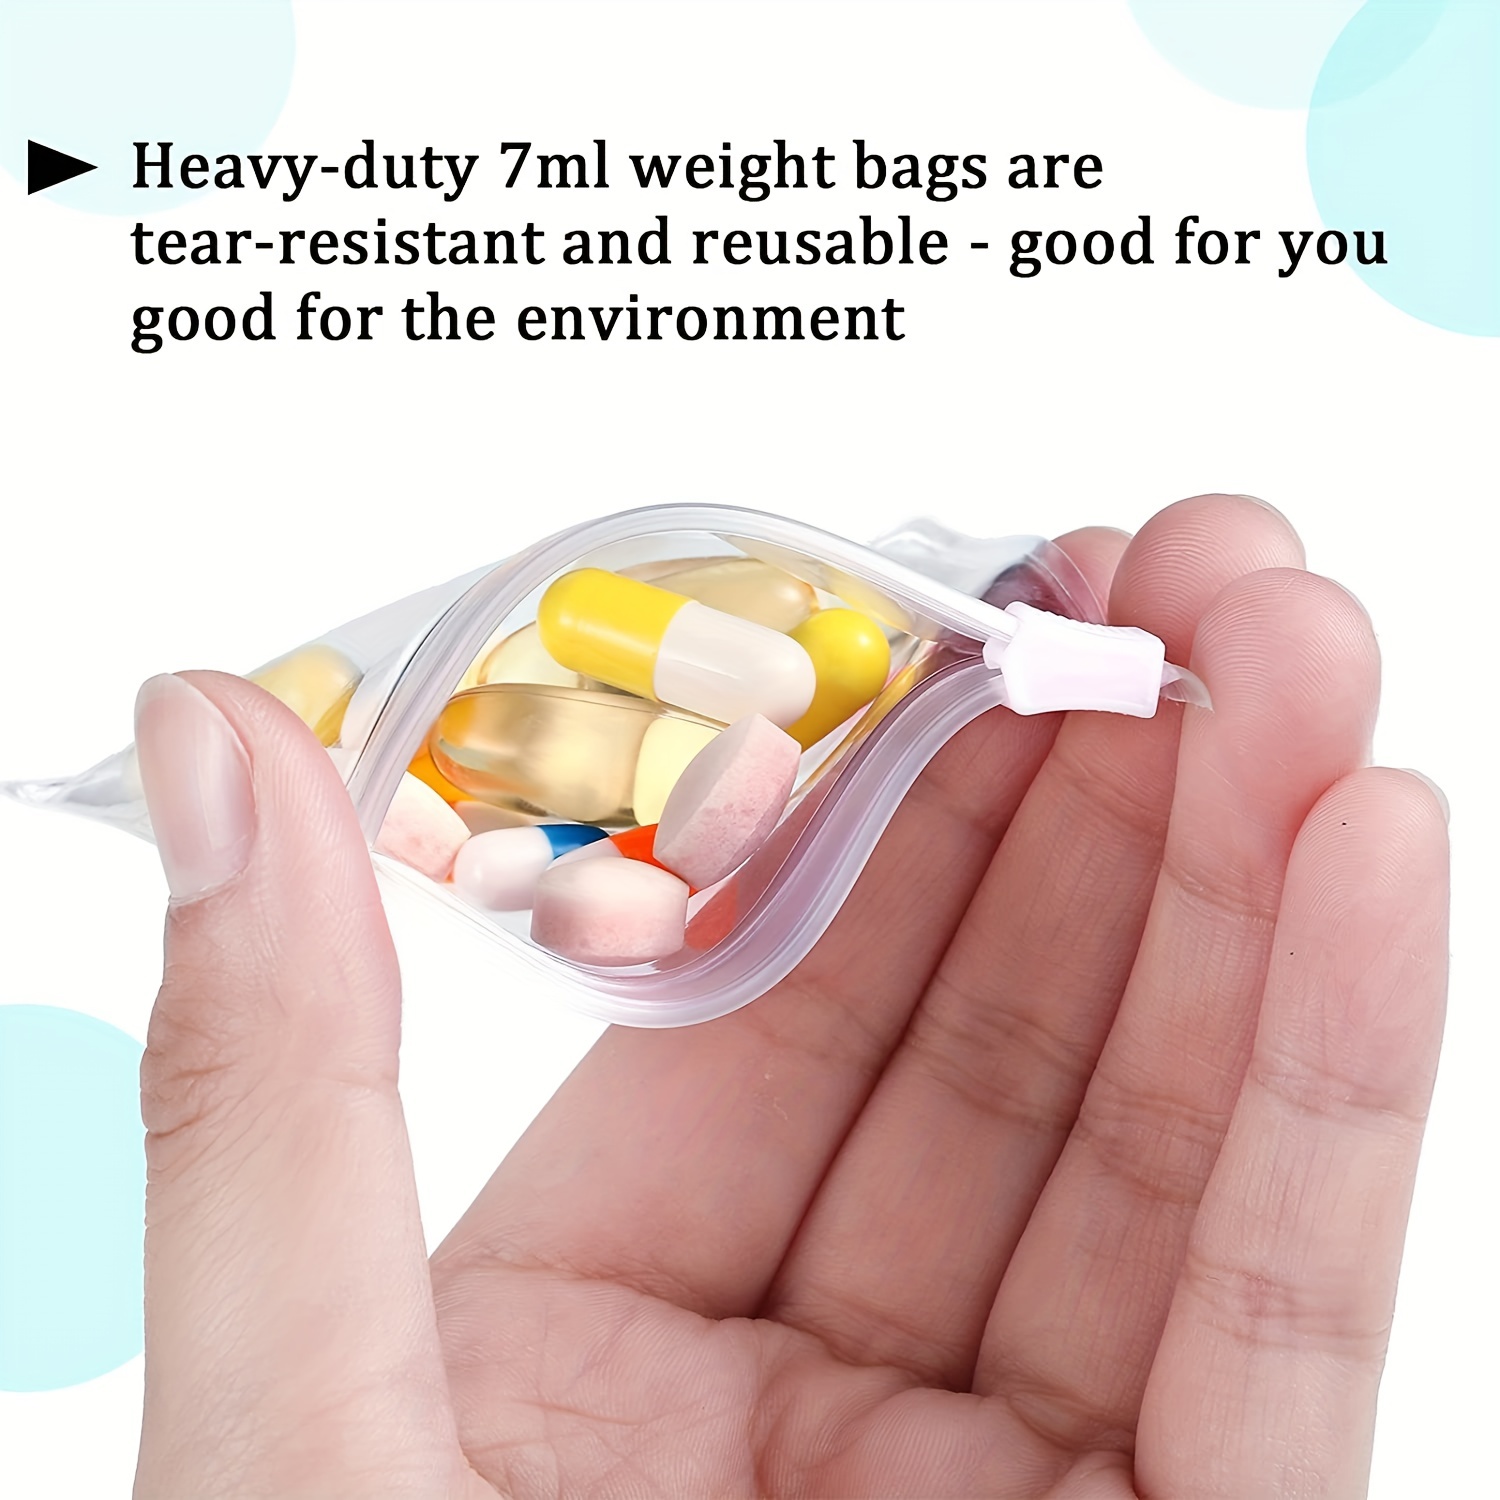 Goaste 56 Pack Pill Pouch Bags, Zippered Translucent Medicine Organizer,  Reusable Travel Self Sealing Vitamine Baggies, Plastic Clear Storage  Pouches